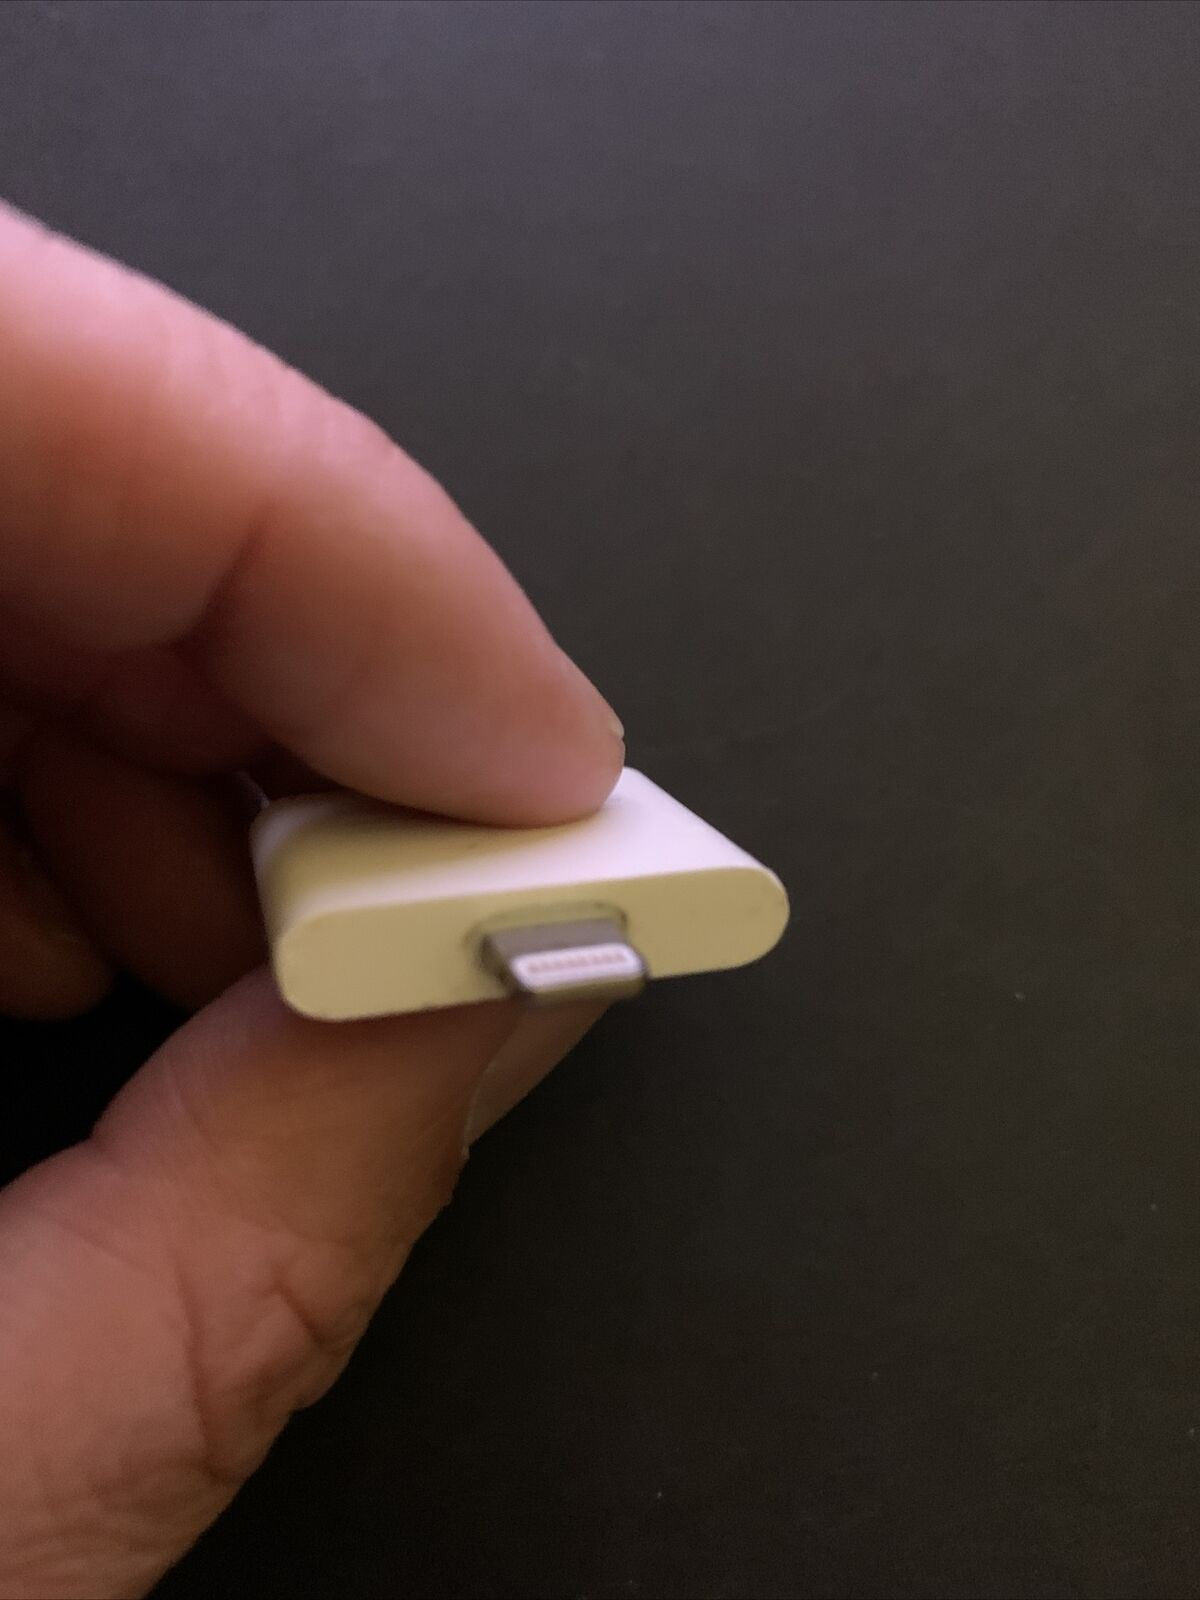 Genuine Authentic APPLE A1468 30 Pin To Lightning Adapter